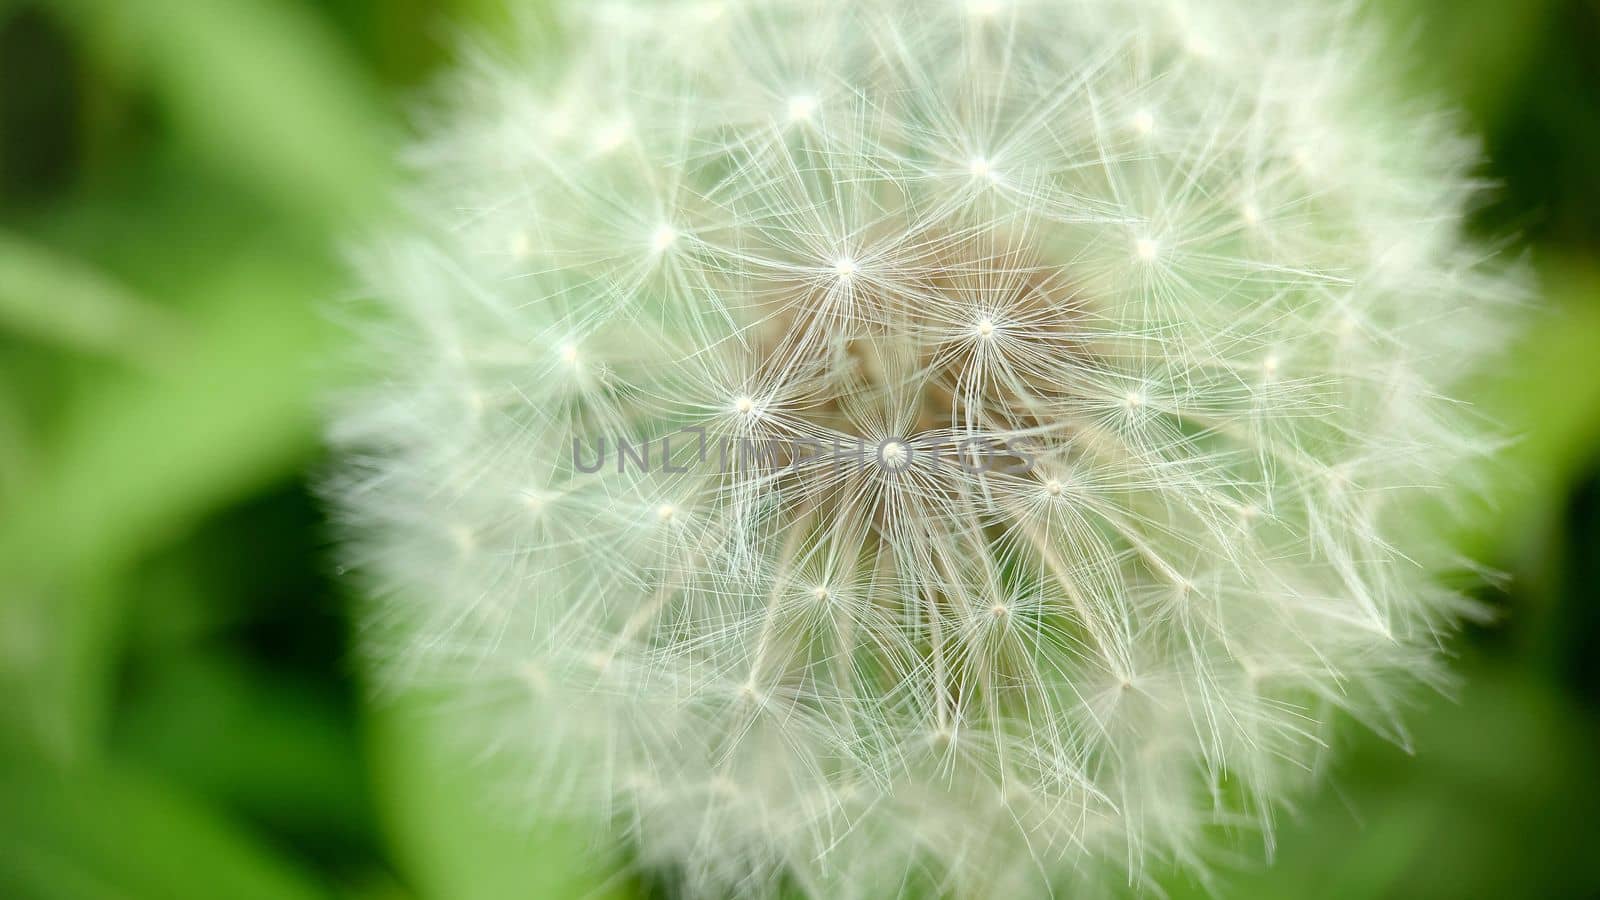 Macrophotography.A ripe dandelion bud. White dandelion flowers in green grass.Texture or background